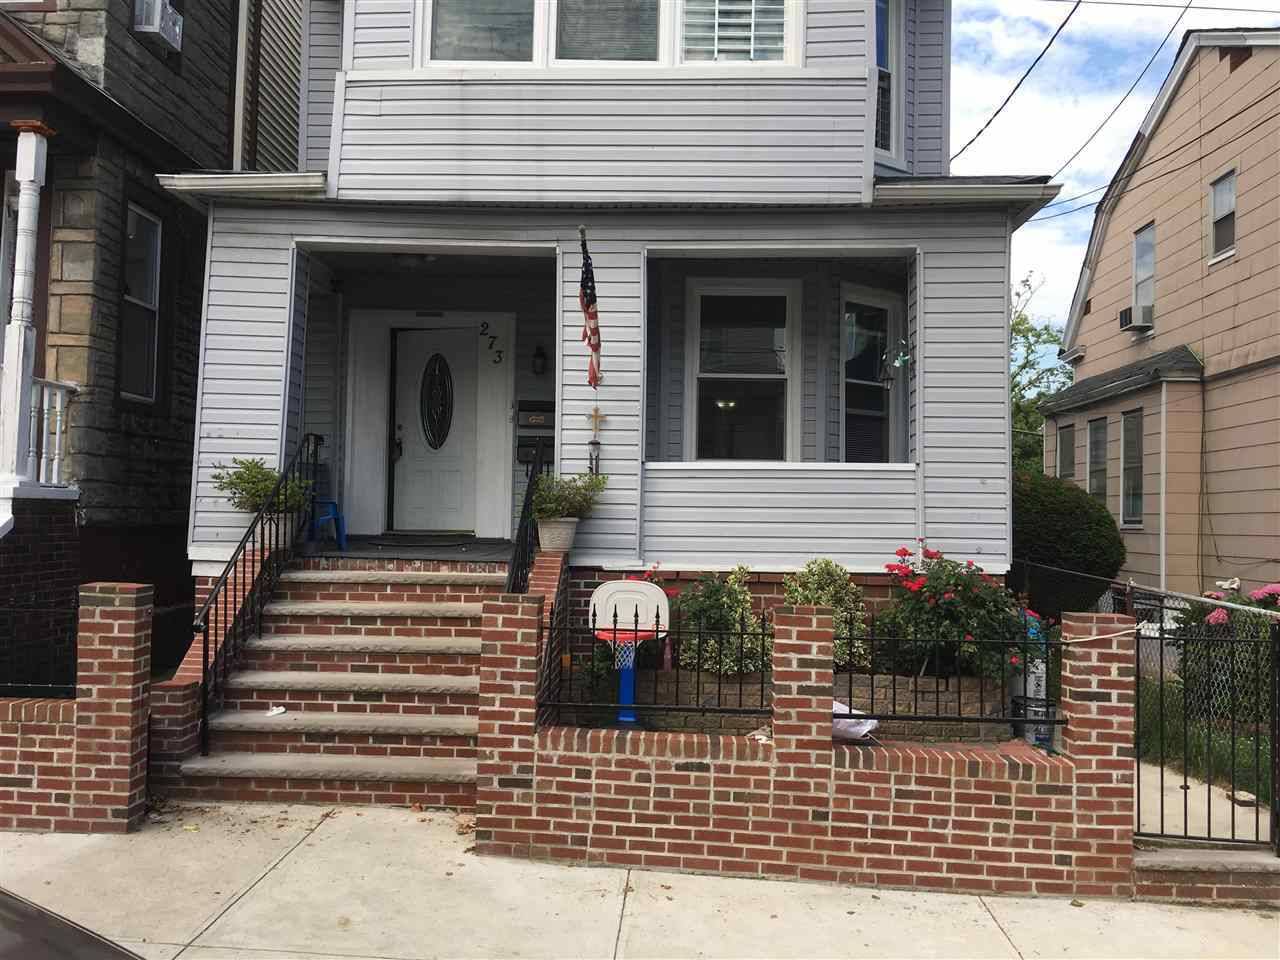 Modern 3BR/2BA duplex apt on one of Jersey City’s most convenient residential blocks